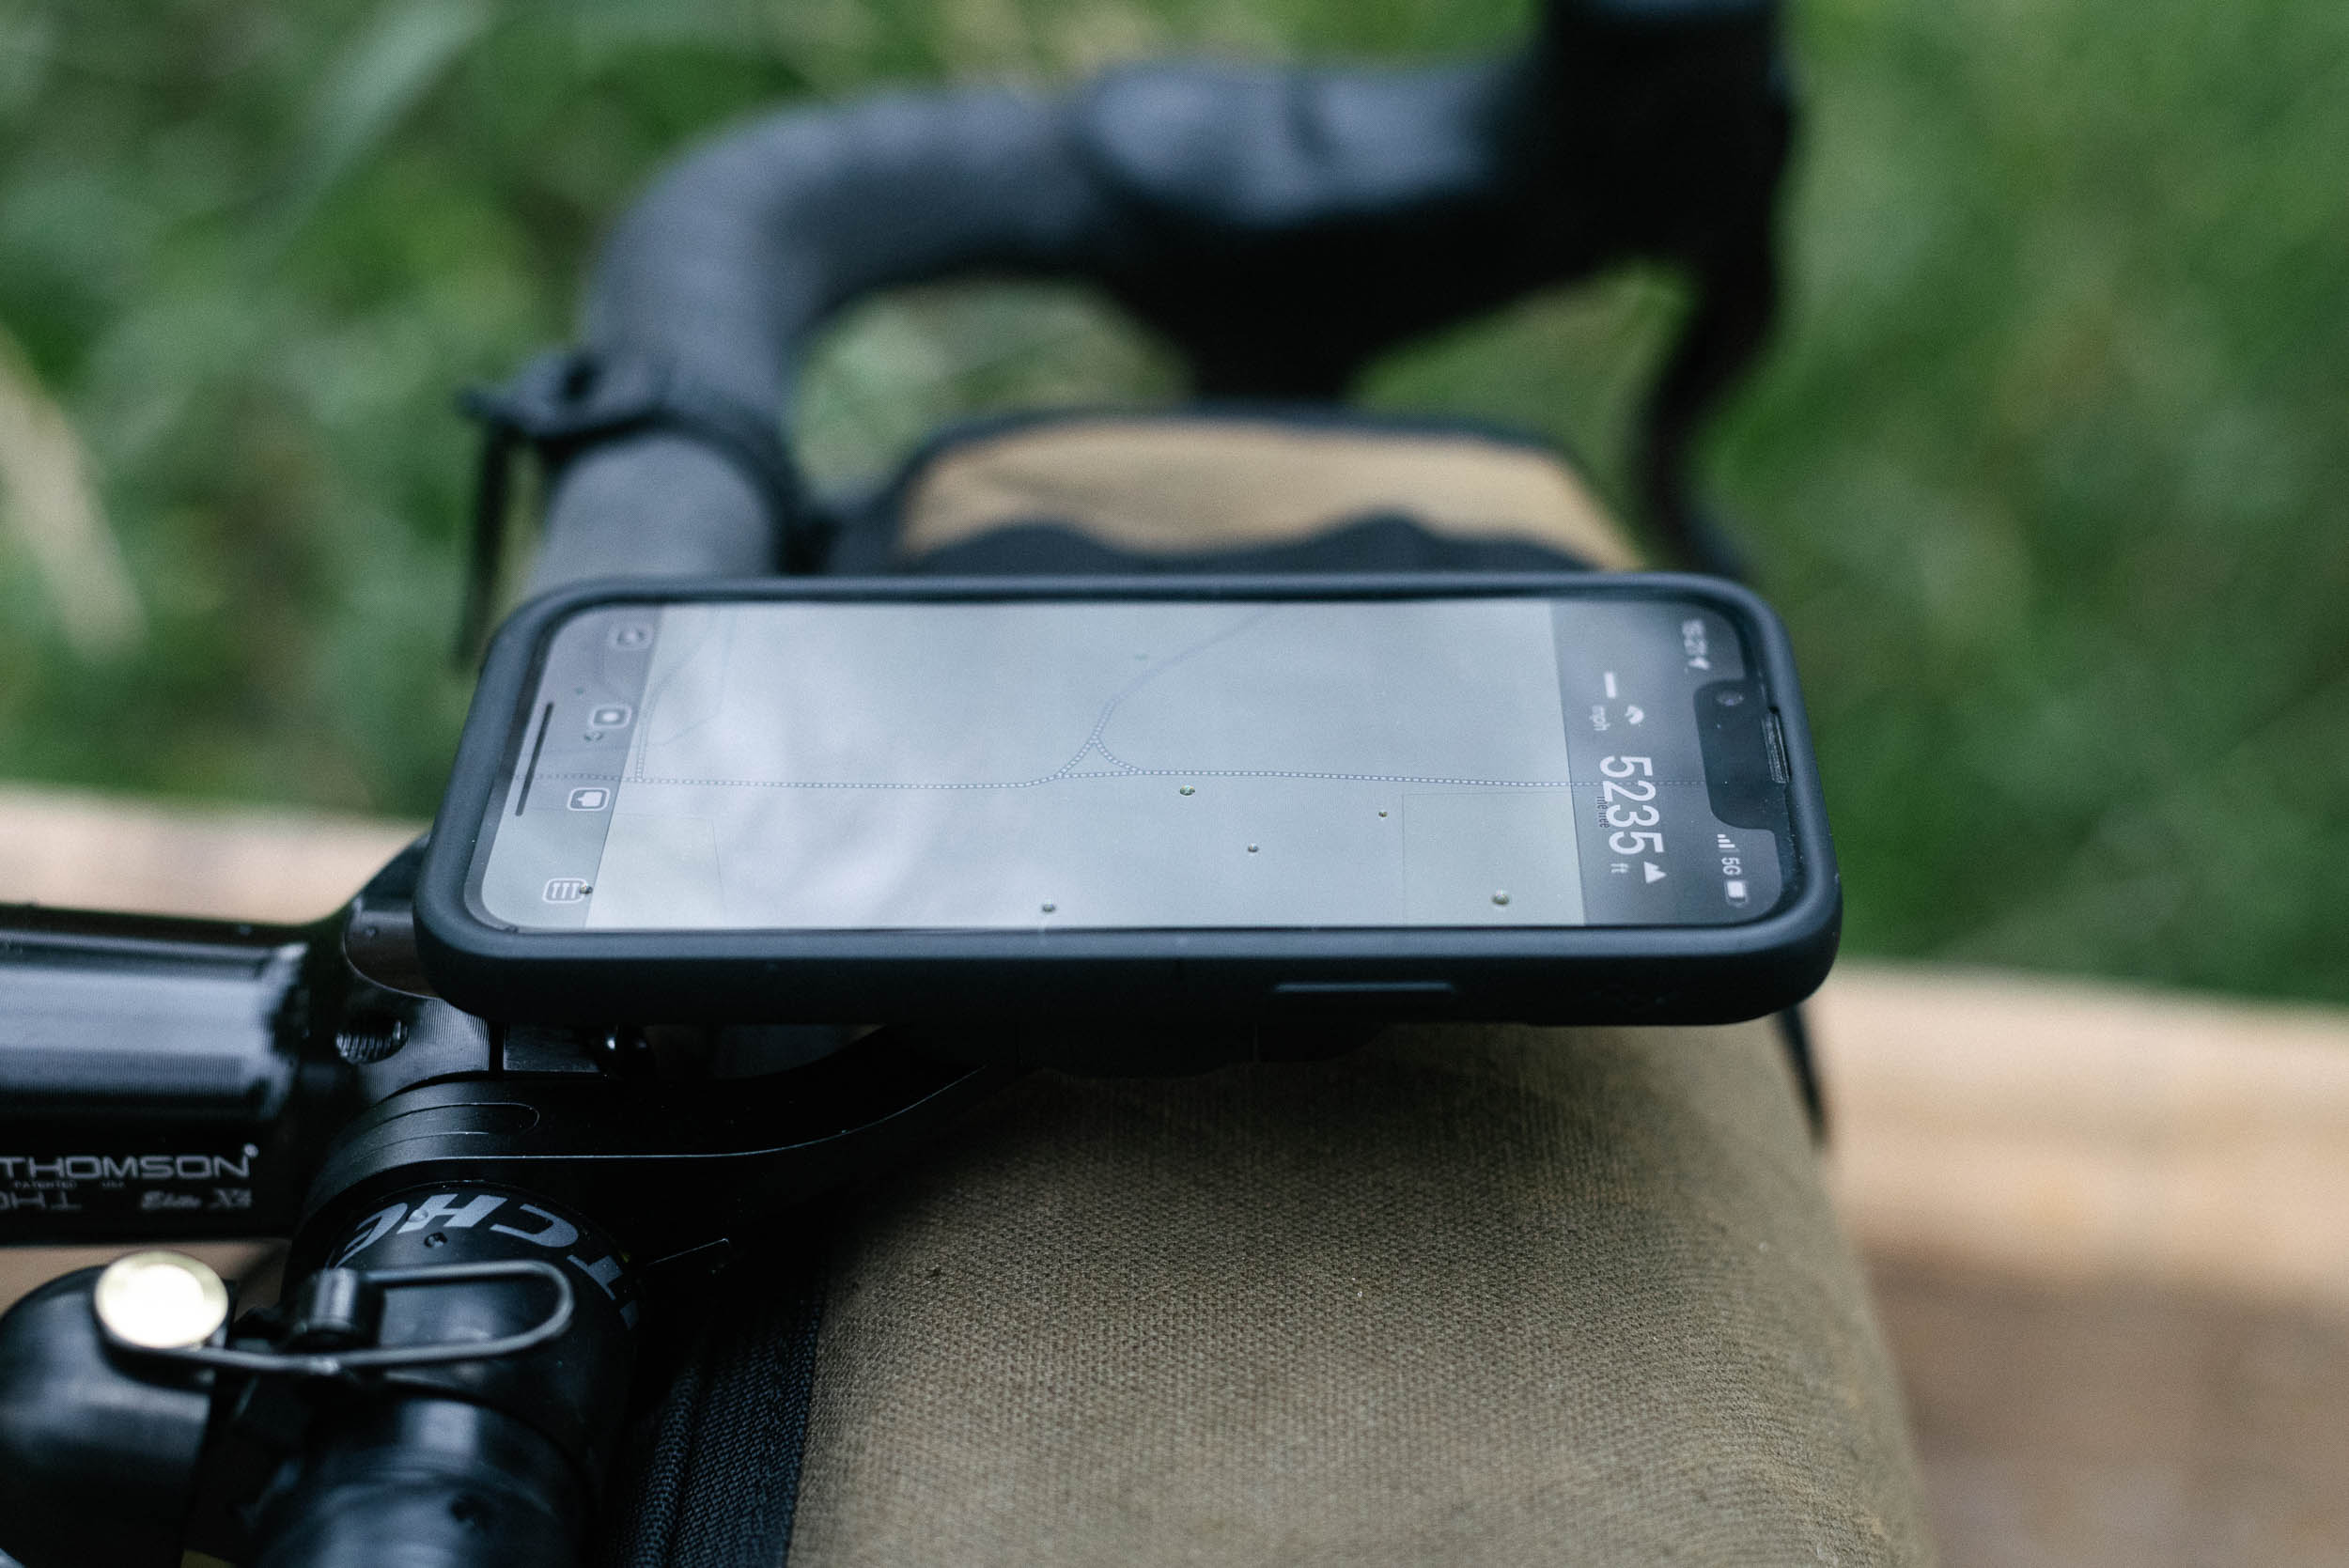 Peak Design Out Front Bike Mount review: My new favorite tech accessory:  Digital Photography Review